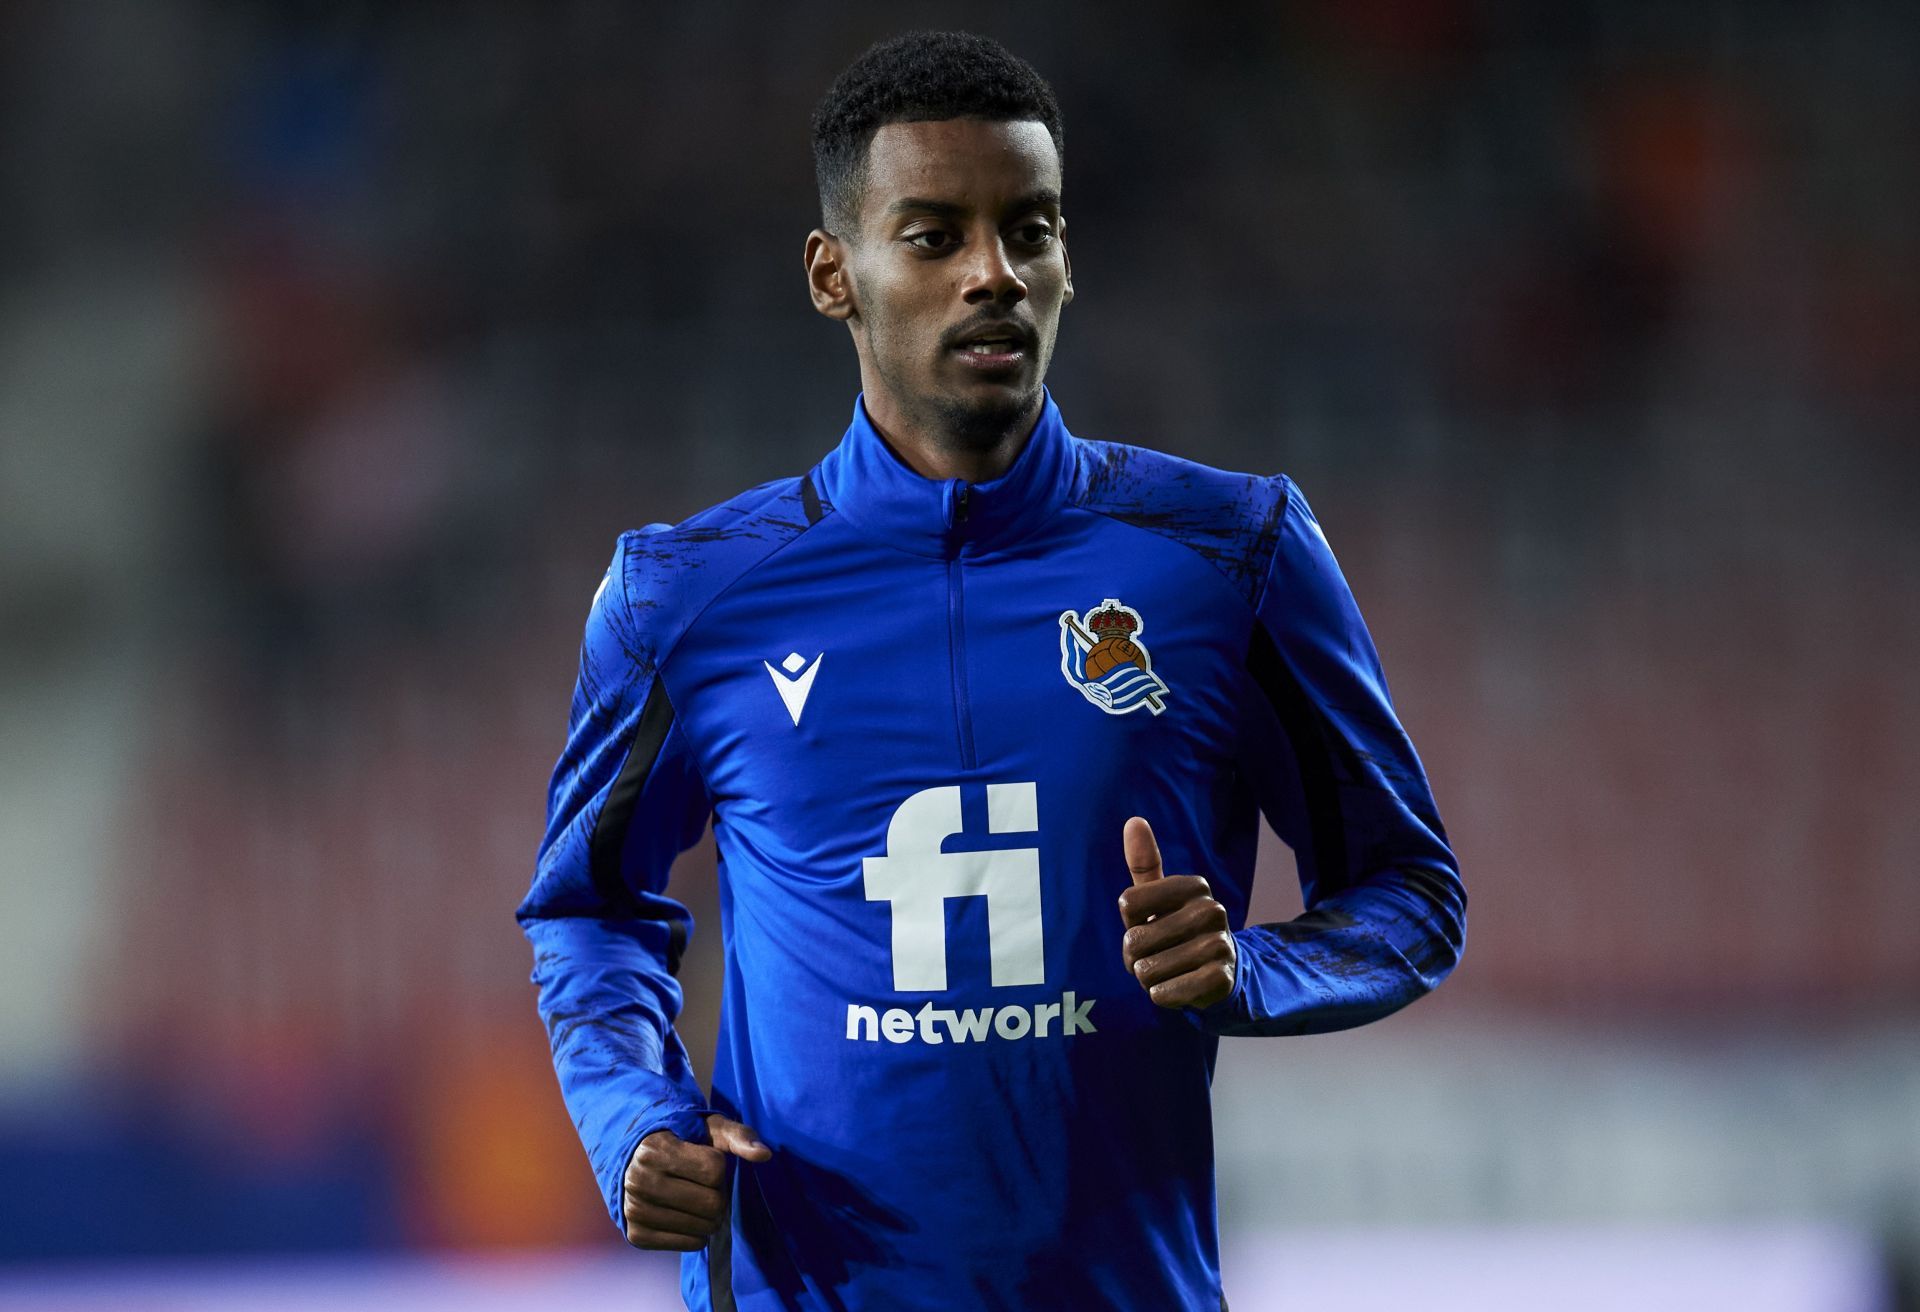 Real Madrid are contemplating a move for Alexander Isak.